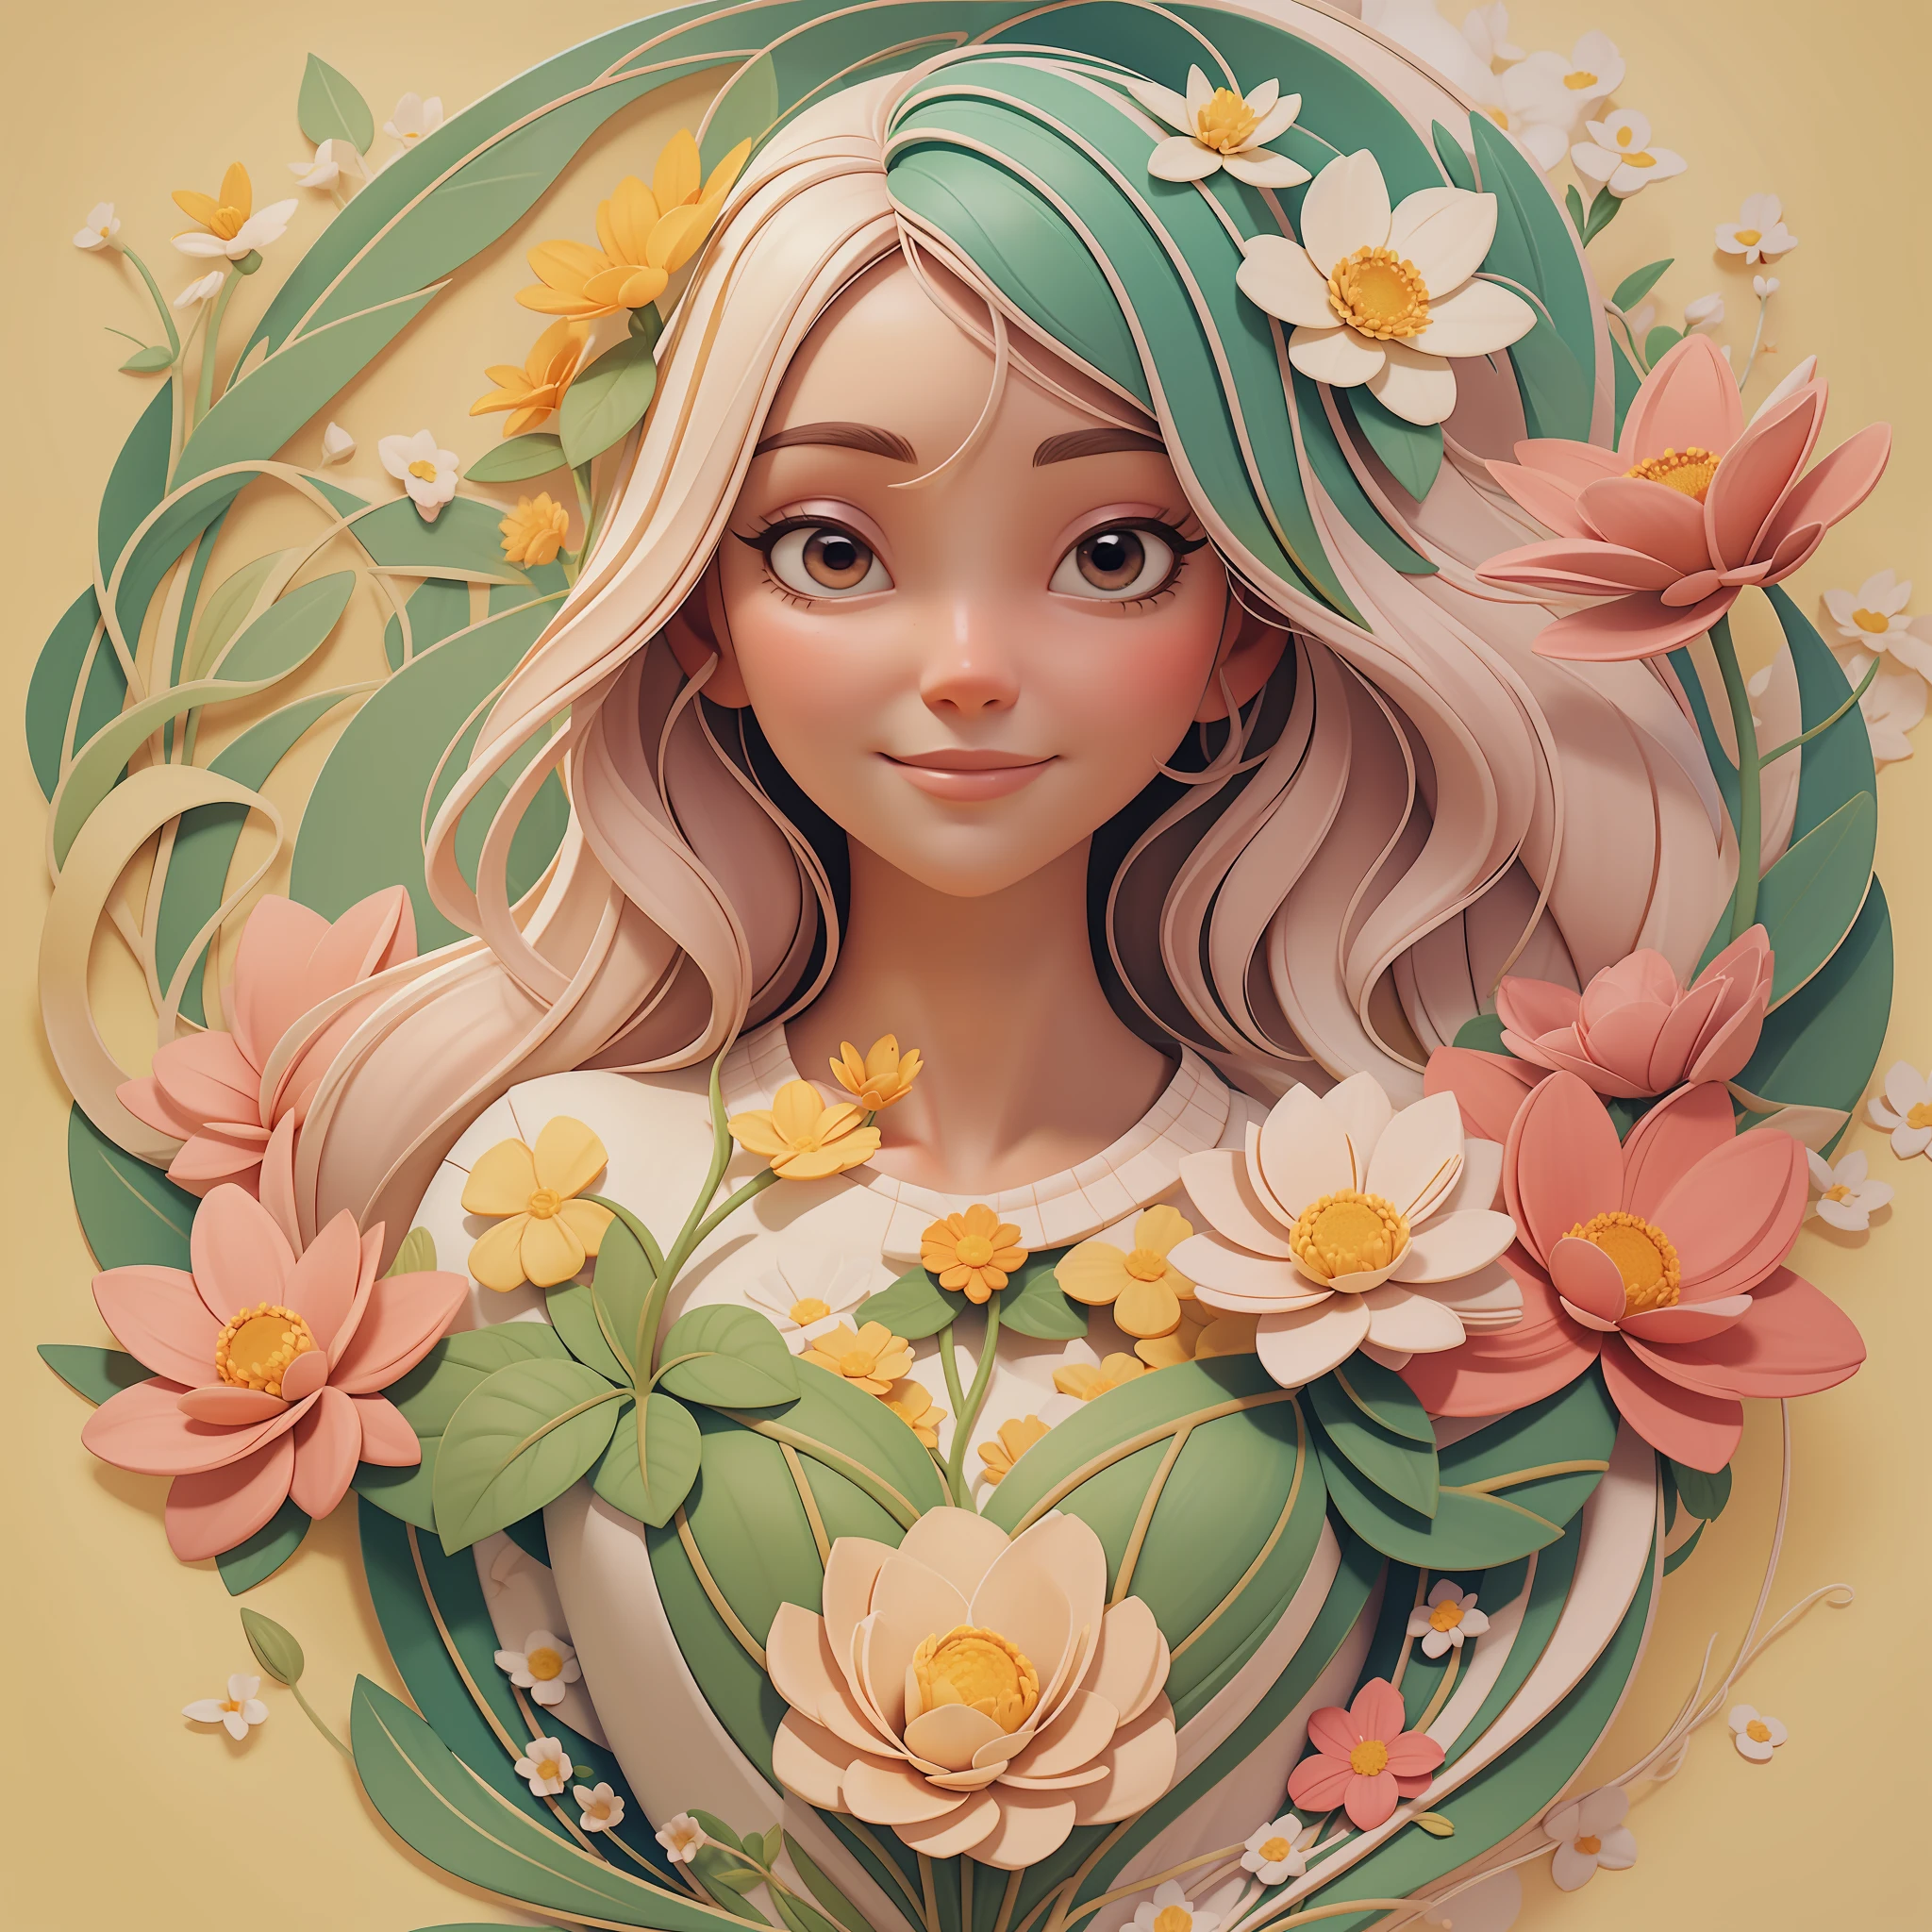 "Inner Flourishing": In this illustration, a character is in the midst of a process of self-discovery and personal growth. She is represented as a flower in full bloom, symbolizing the journey of becoming the best version of herself. This image conveys the message that we all have incredible inner potential that can flourish with care and self-acceptance.